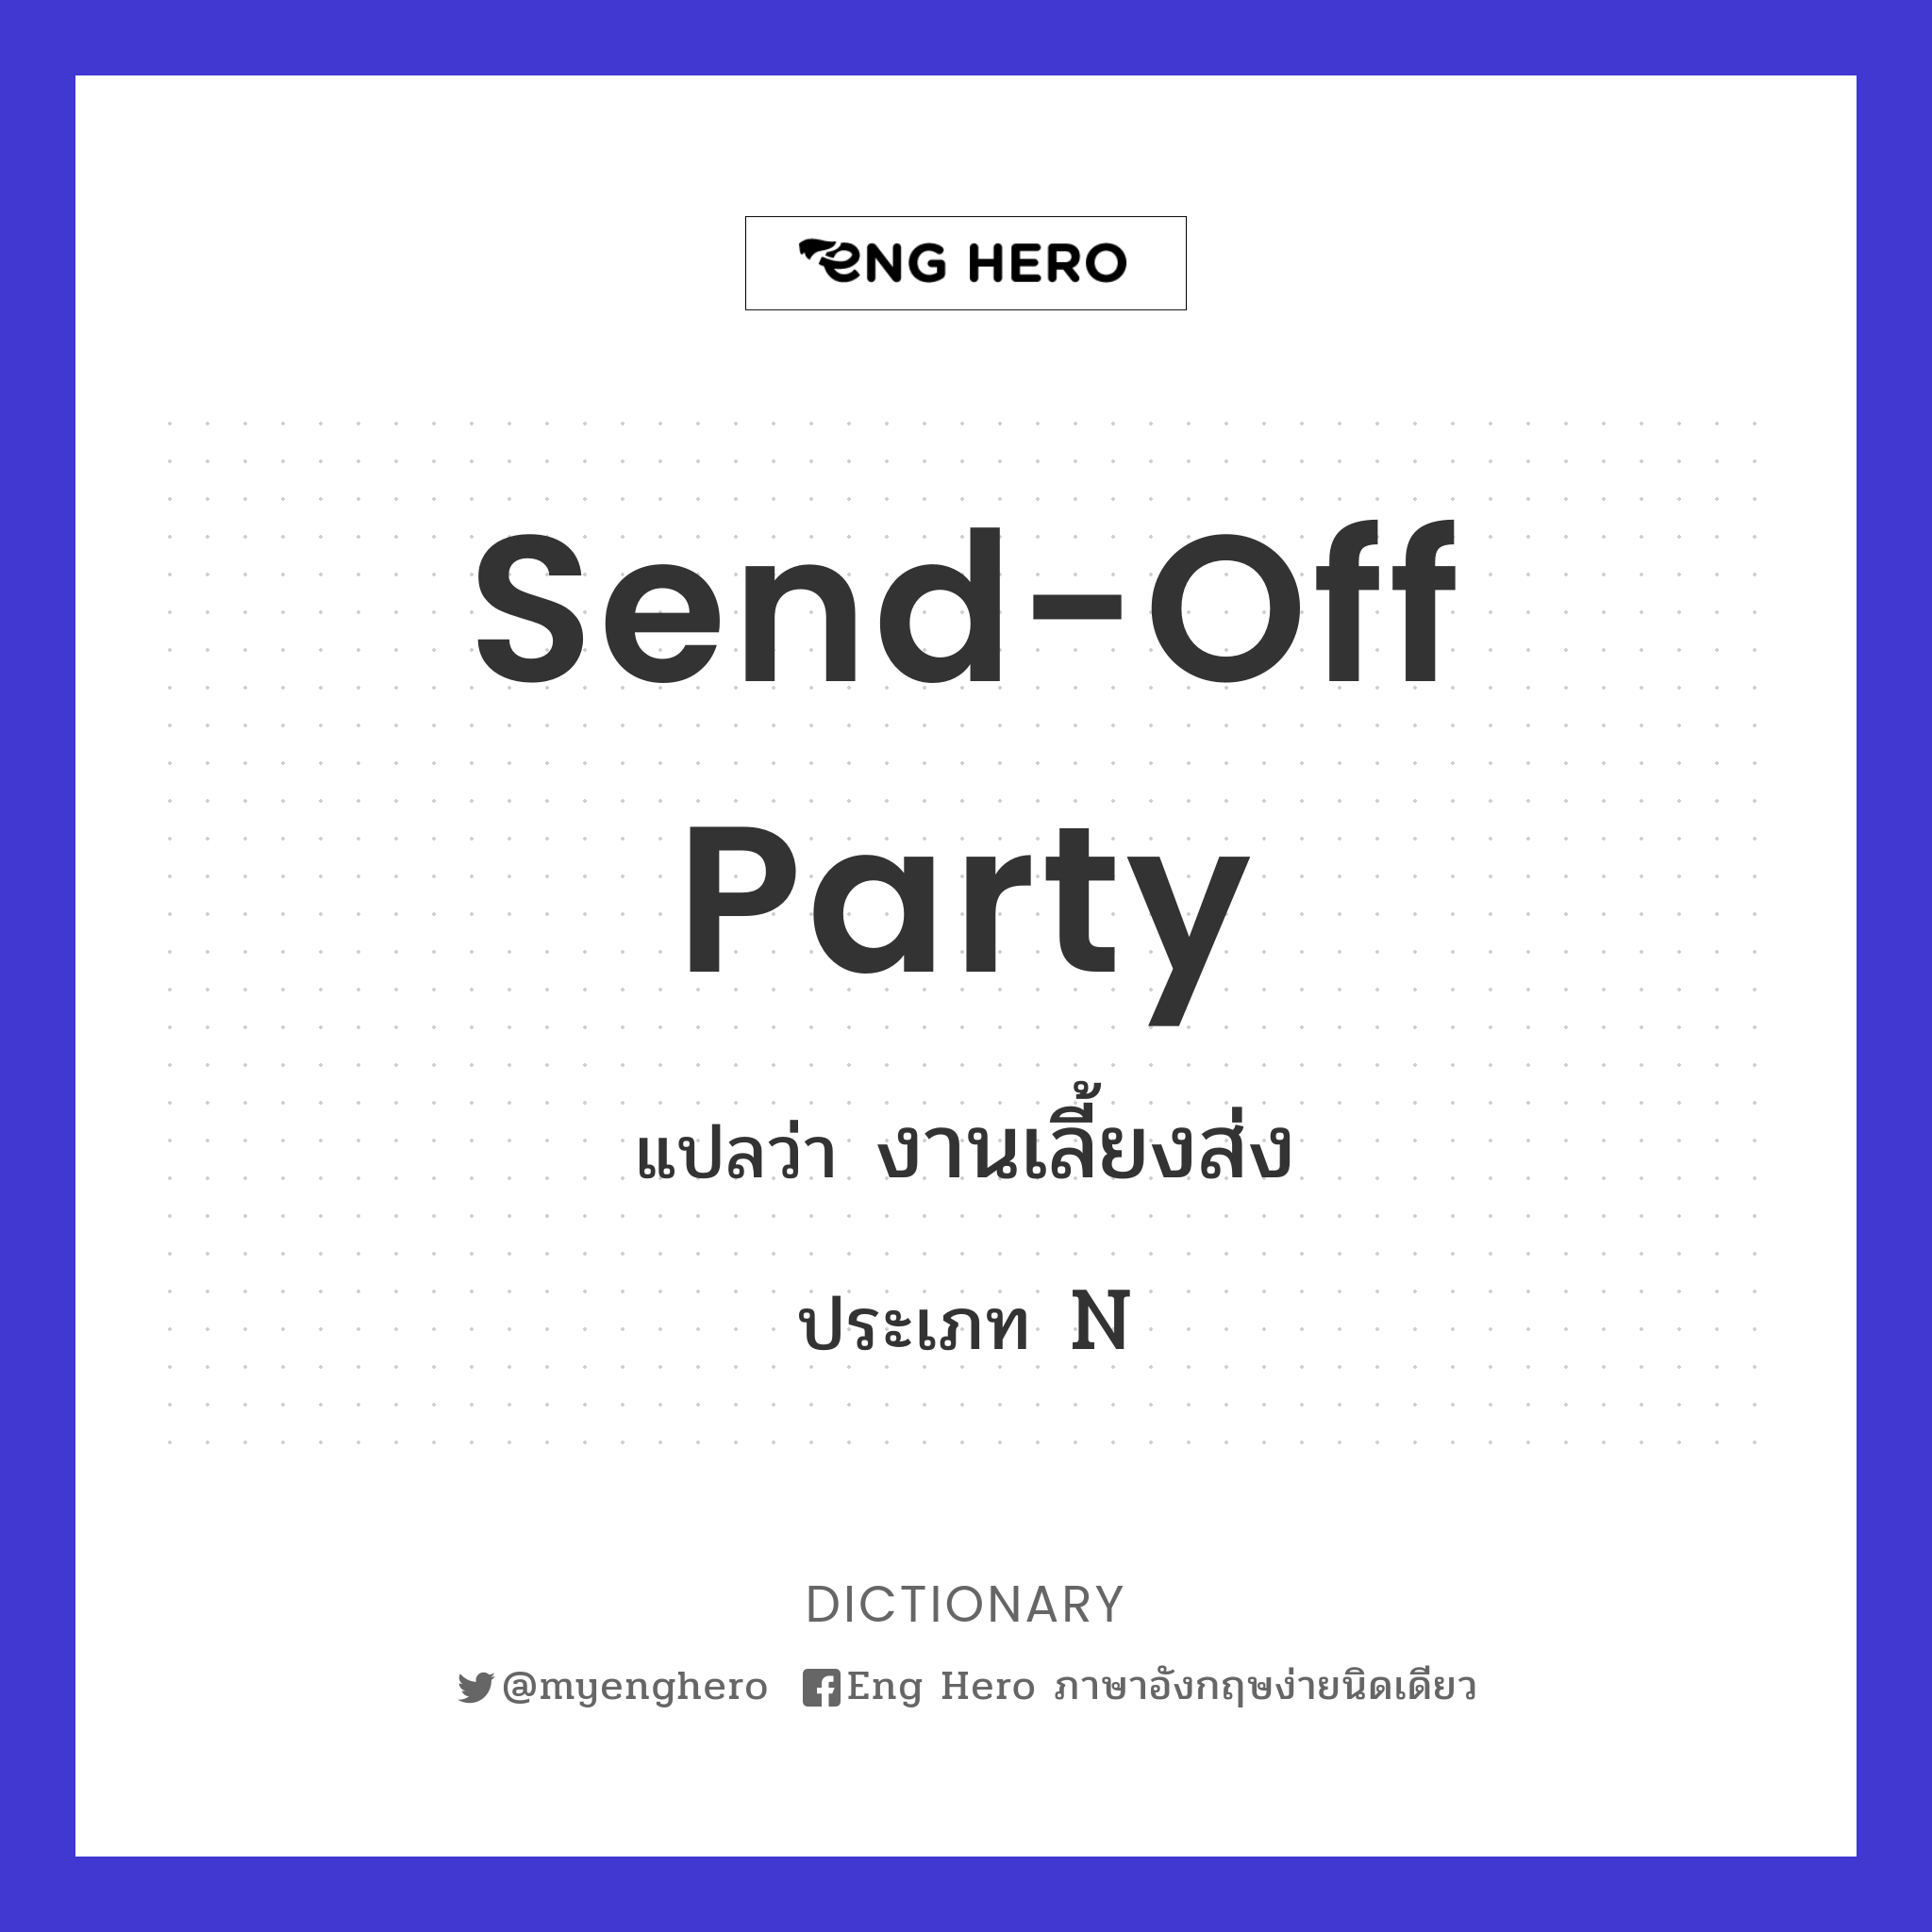 send-off party